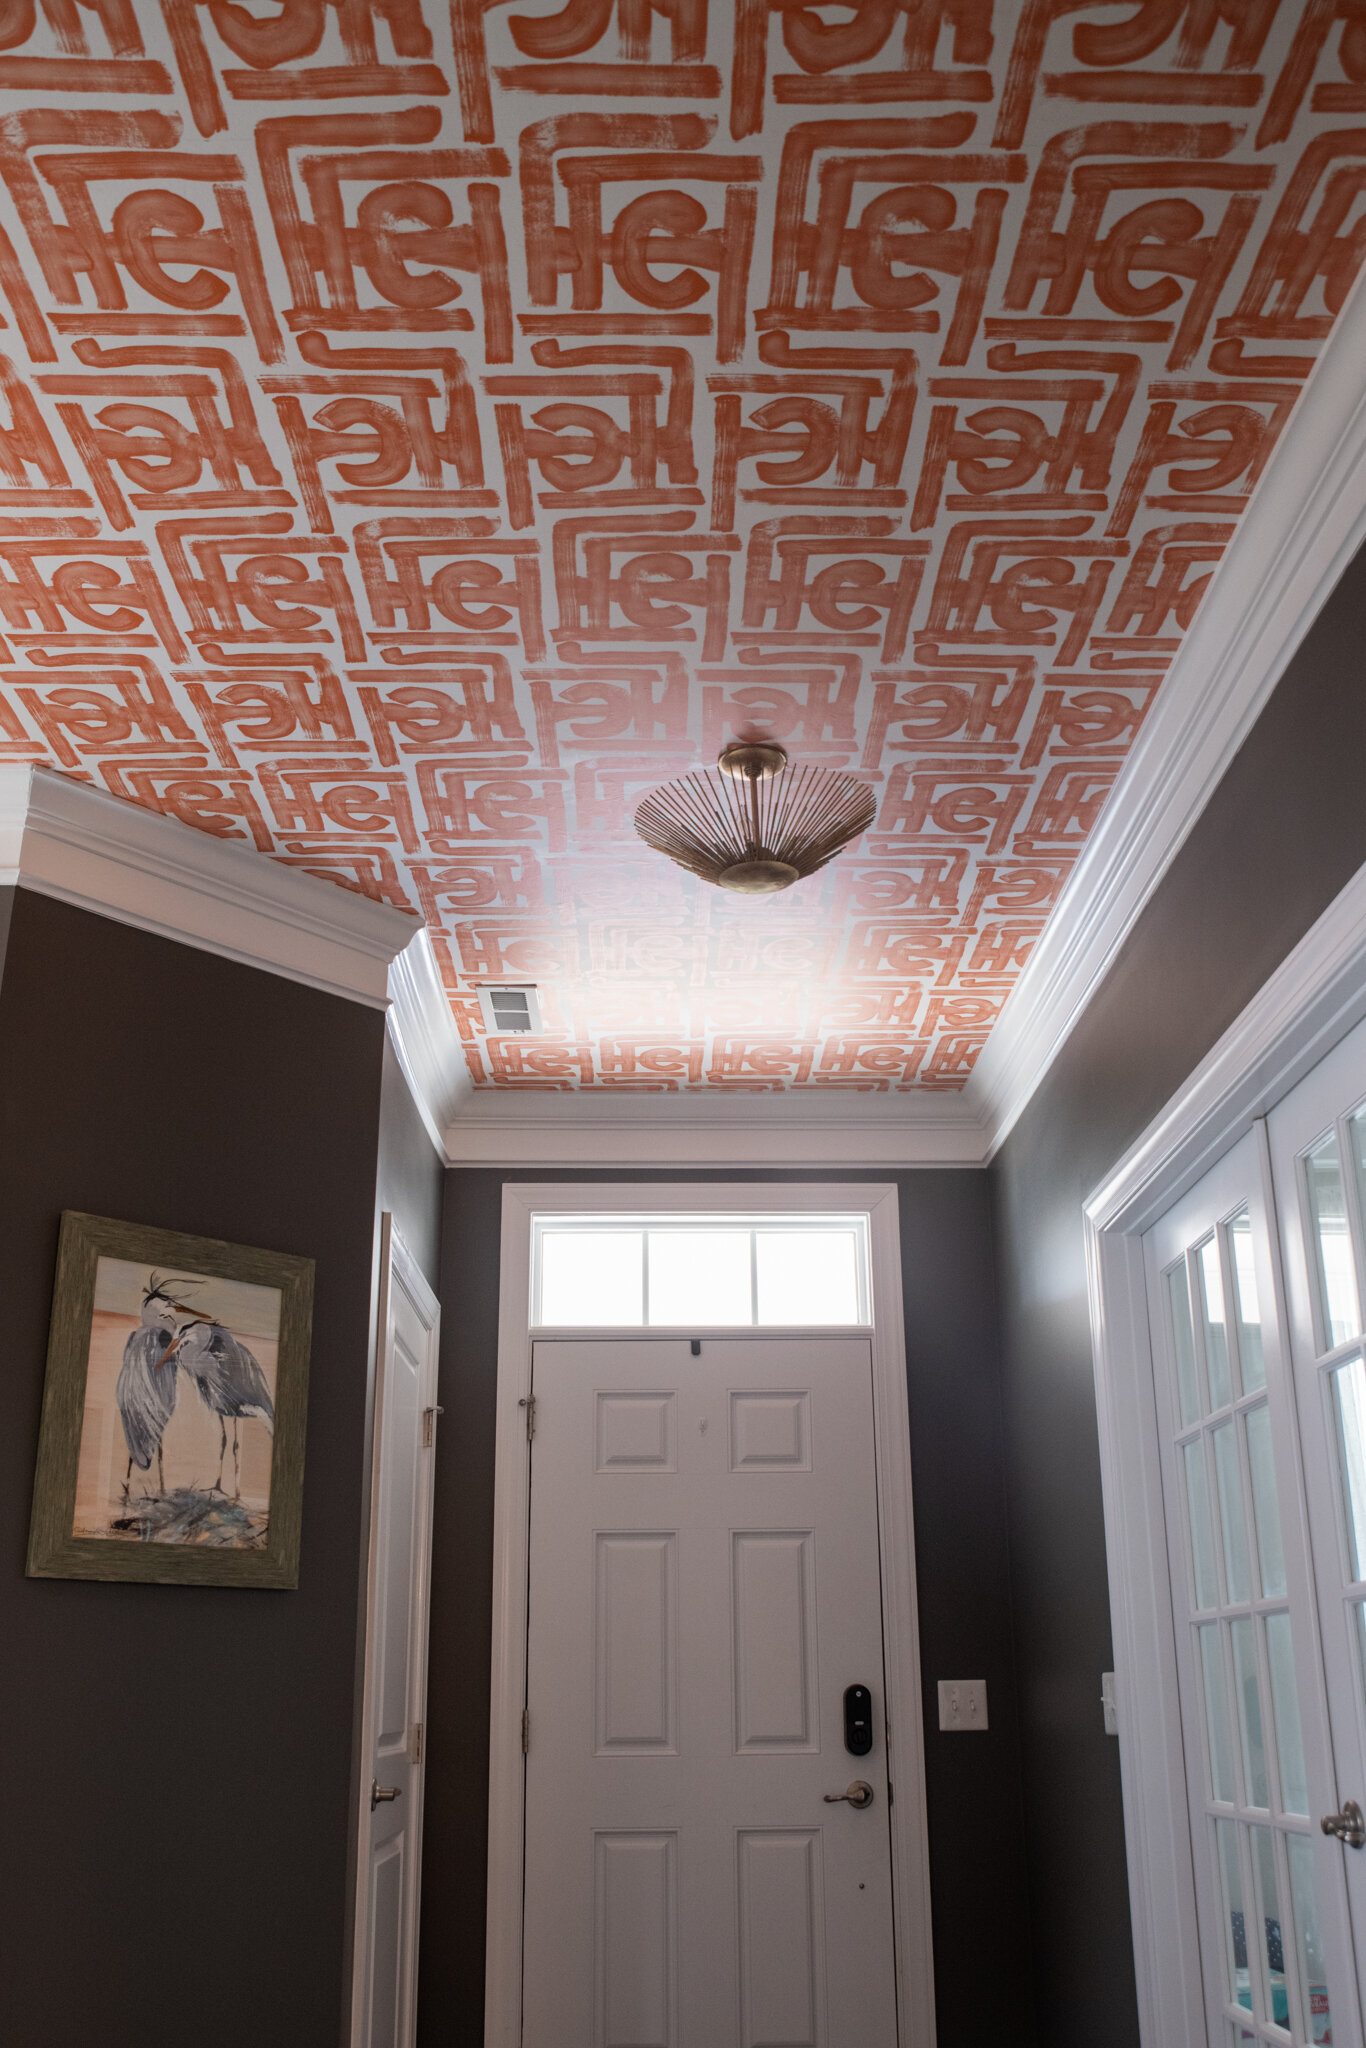 Dwell-Chic-Cool-Transitional-Home-Hallway-Ceiling-Wallpaper-Overall.jpg